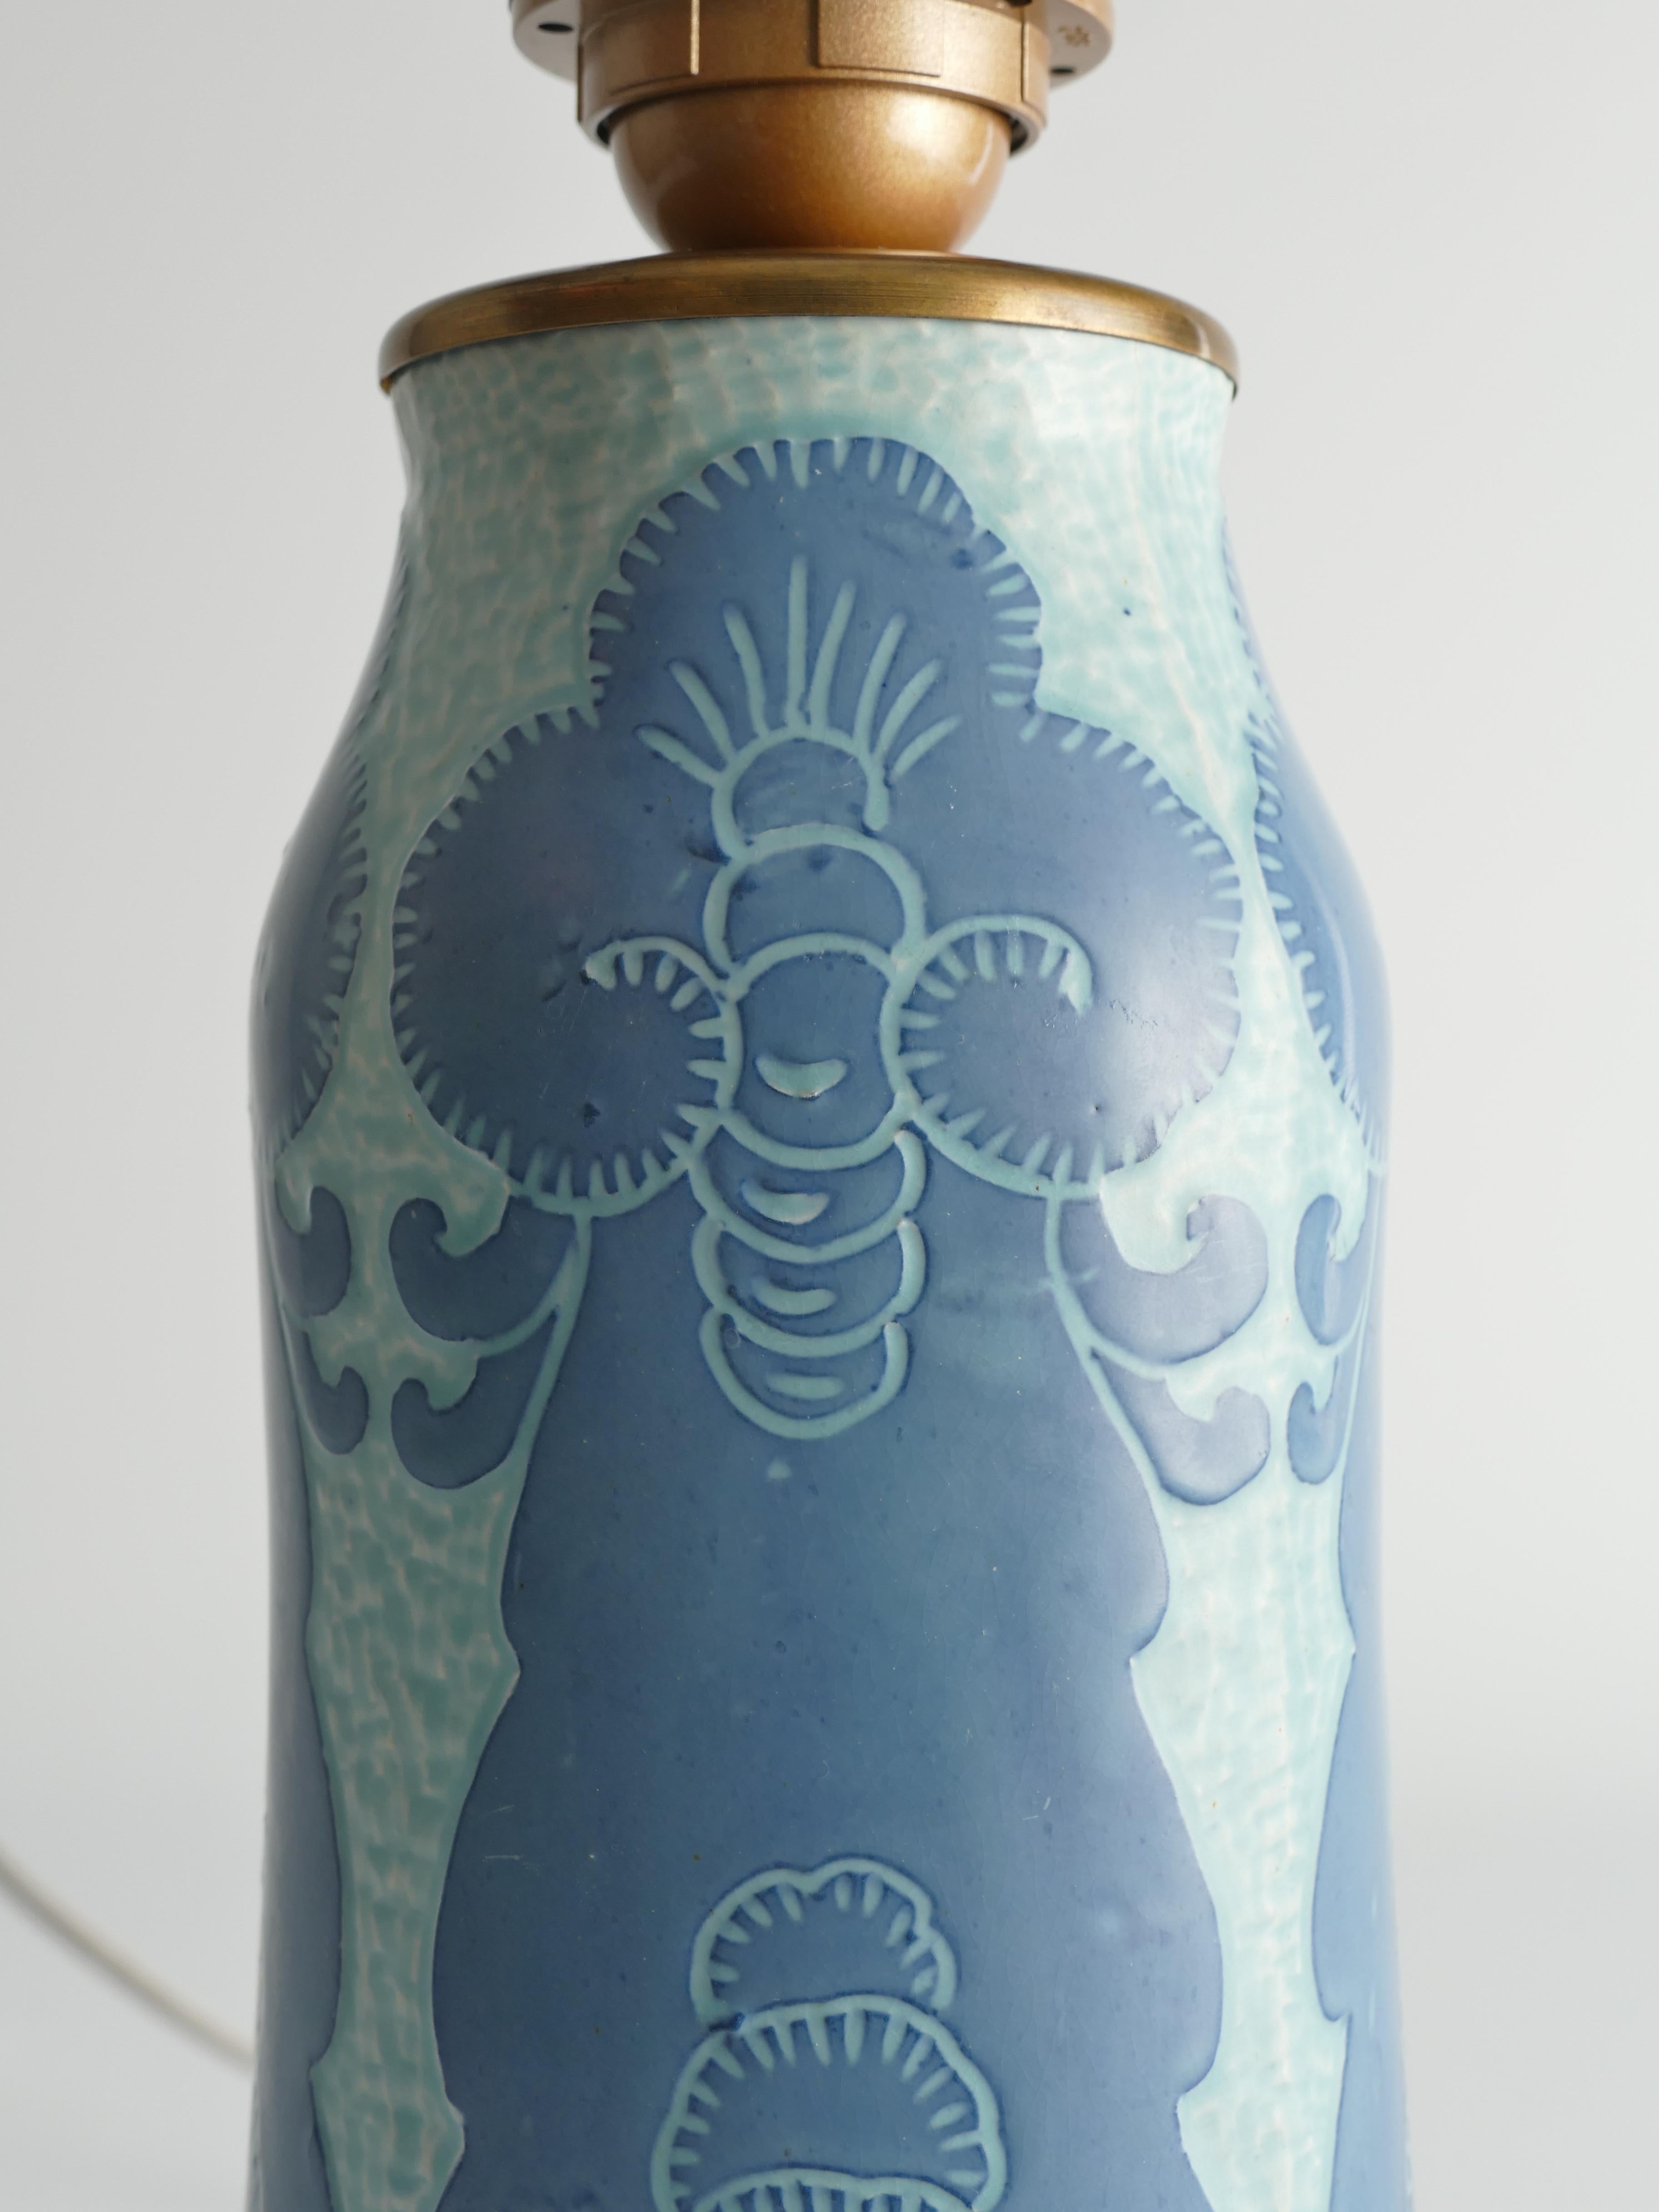 Unique Art Nouveau Pale Blue Ceramic Table Lamp by Josef Ekberg for Gustavsberg In Good Condition For Sale In Grythyttan, SE